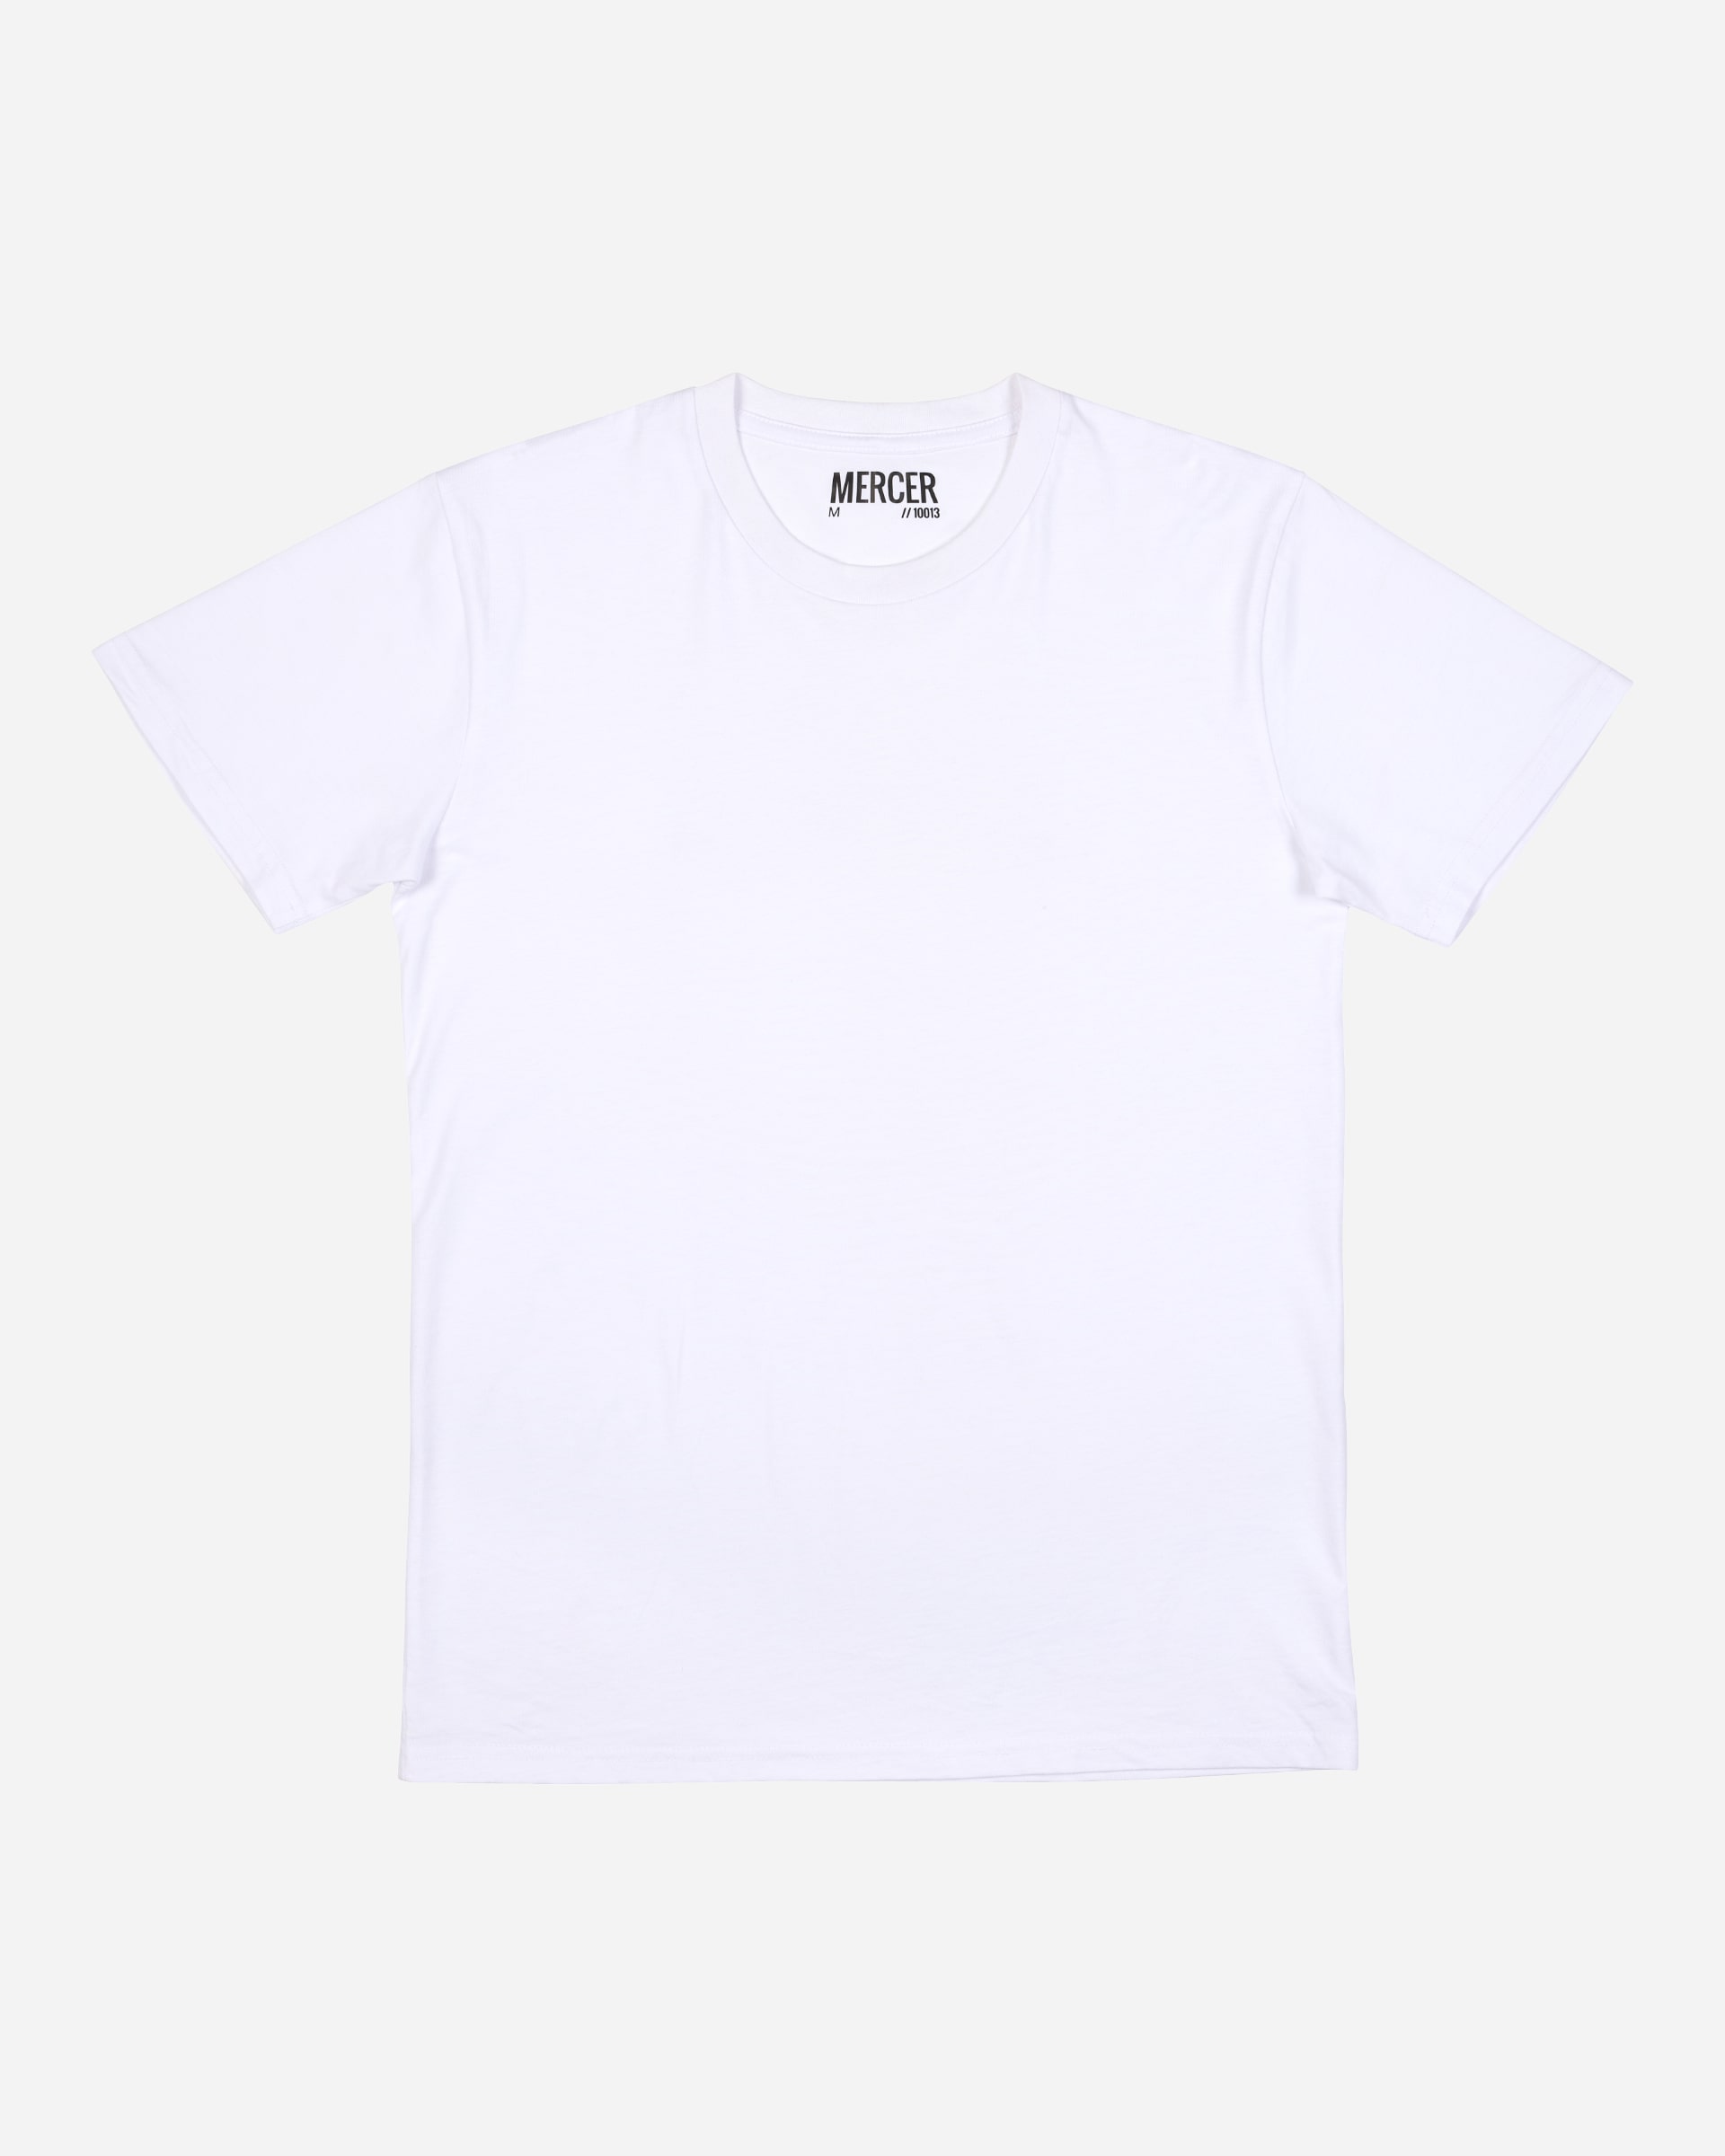 Mid-Weight White Crew Neck - Men's T-Shirts at Menzclub